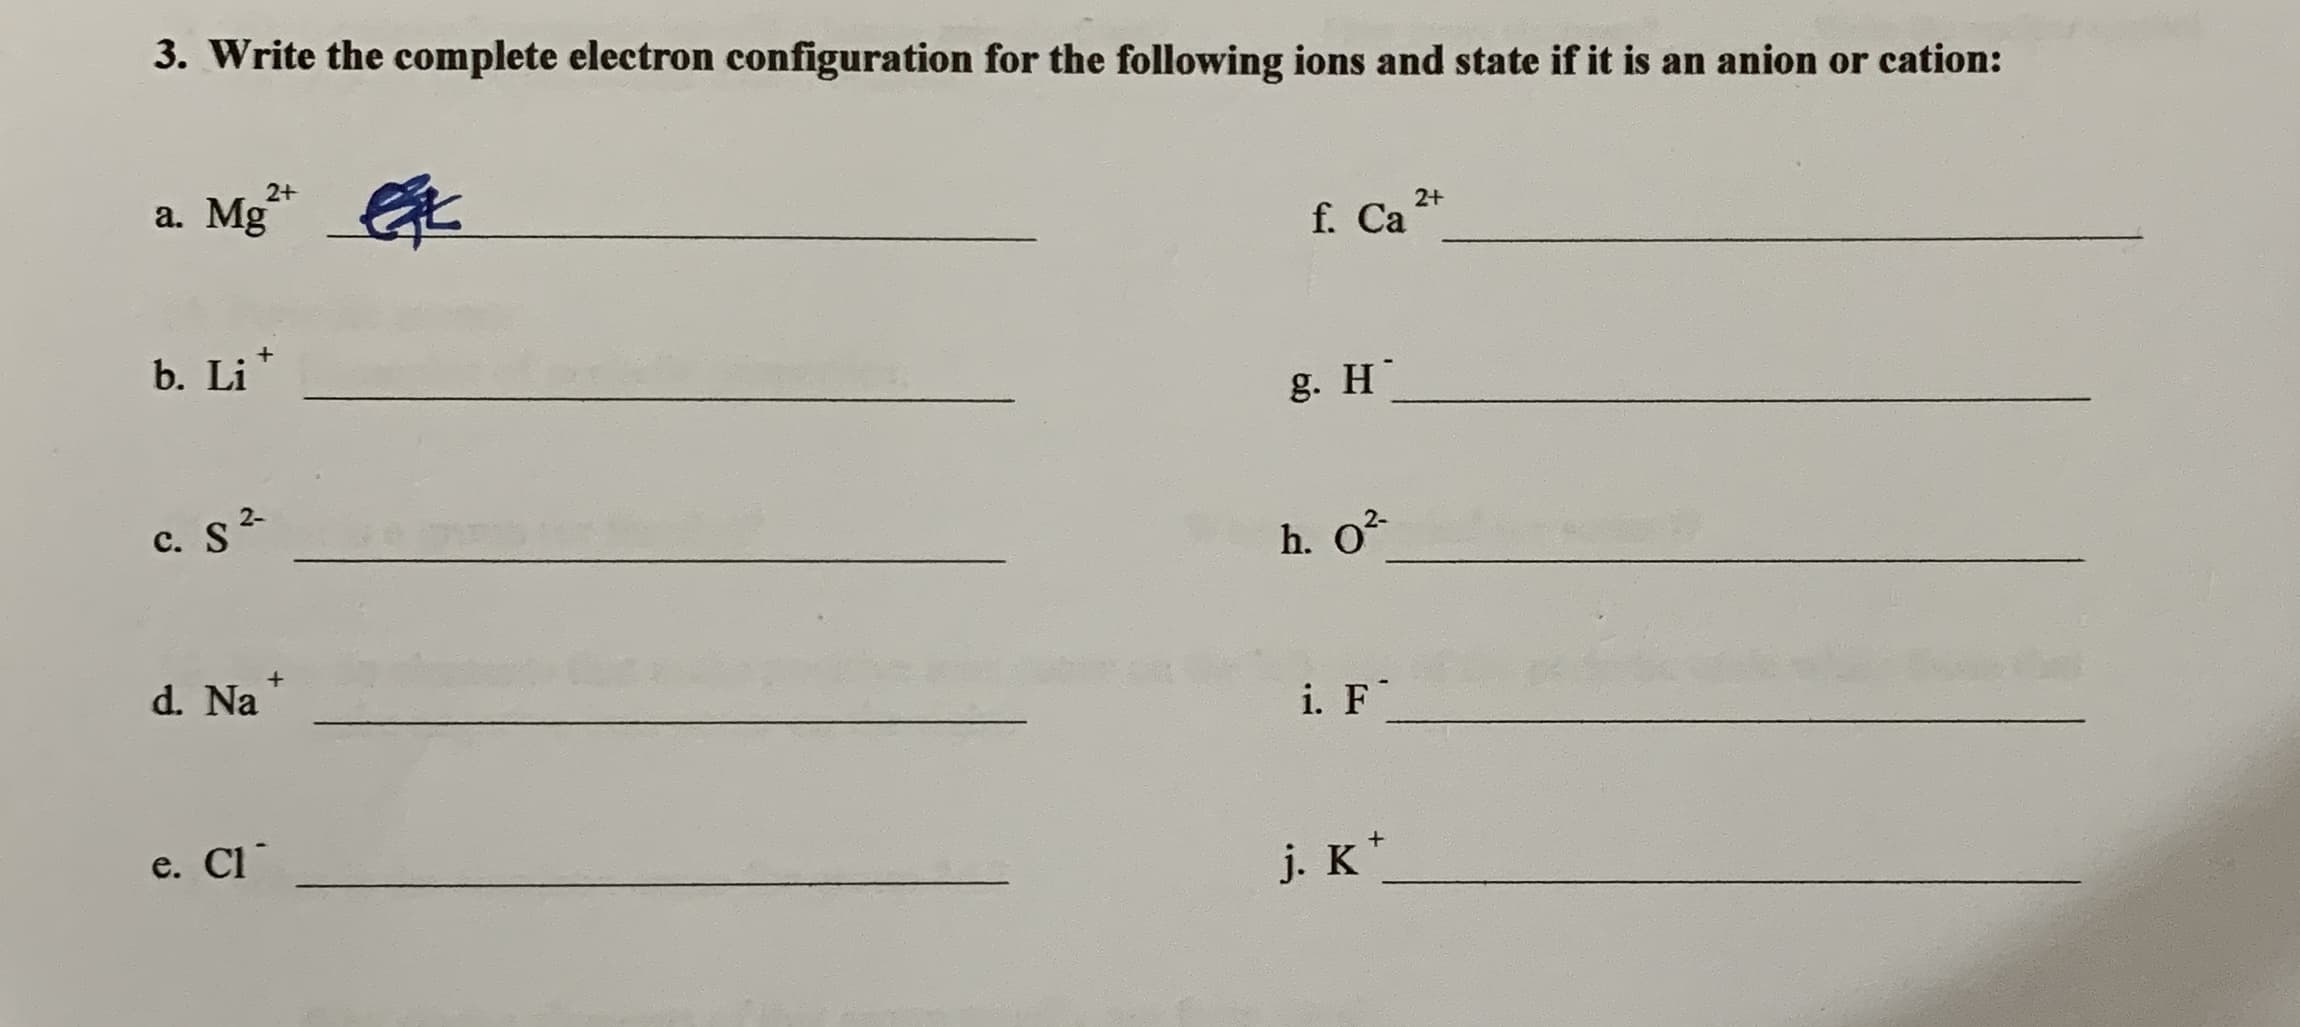 3. Write the complete electron configuration for the following ions and state if it is an anion or cation:
a. Mg*
2+
2+
f. Ca
b. Li
g. H
C. S2
h. O?
d. Na
i. F
e. Cl
j. K*
